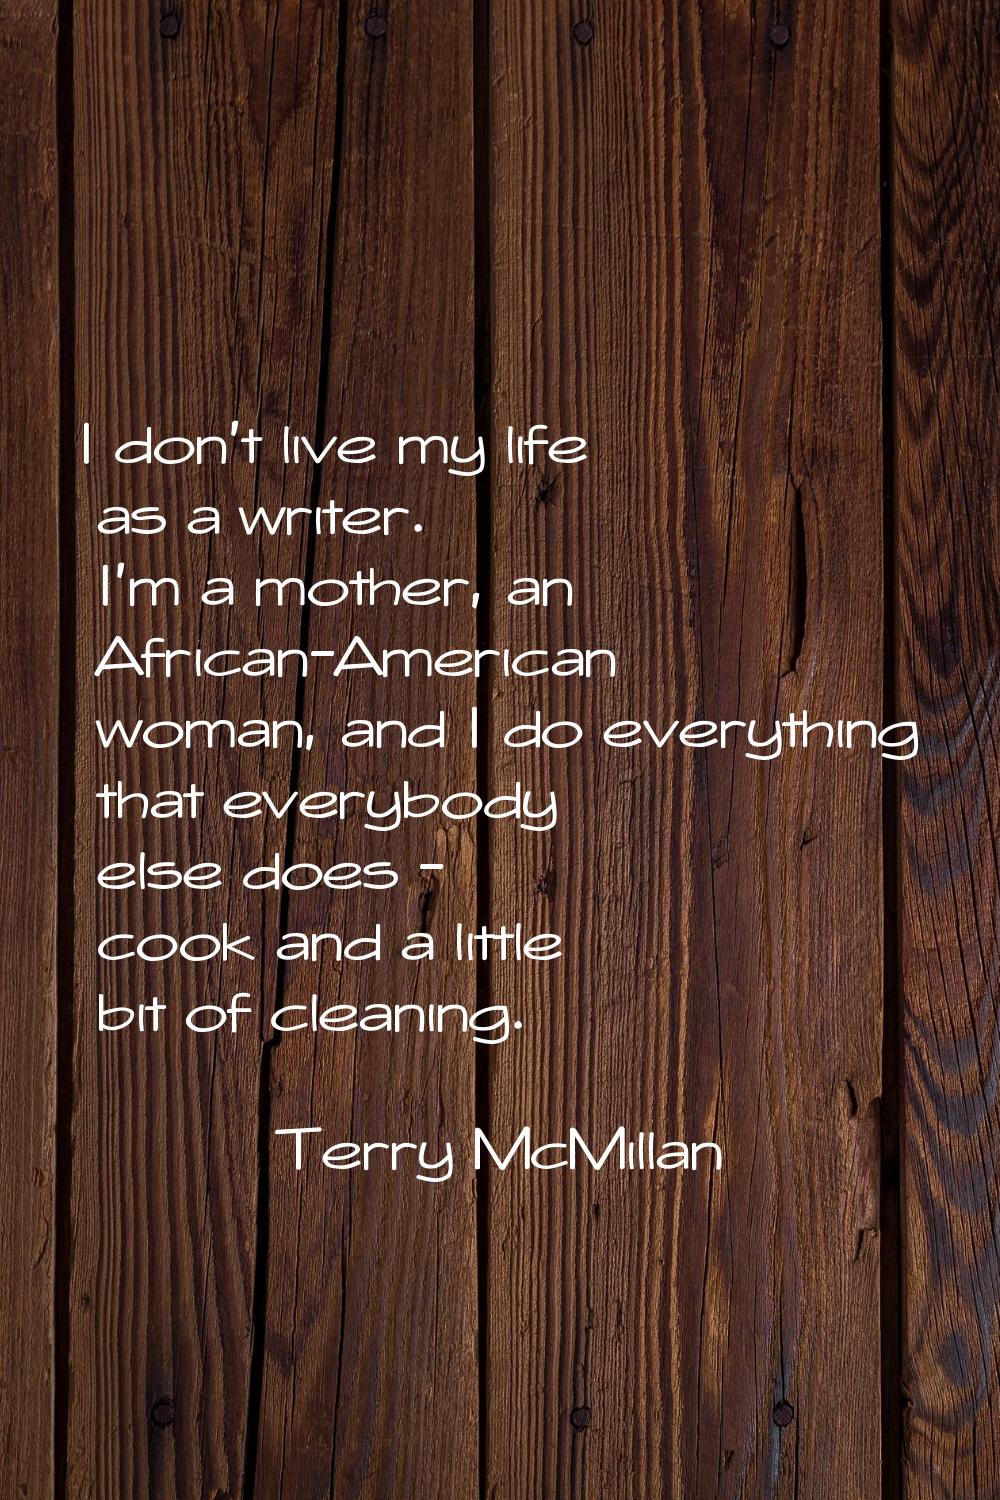 I don't live my life as a writer. I'm a mother, an African-American woman, and I do everything that